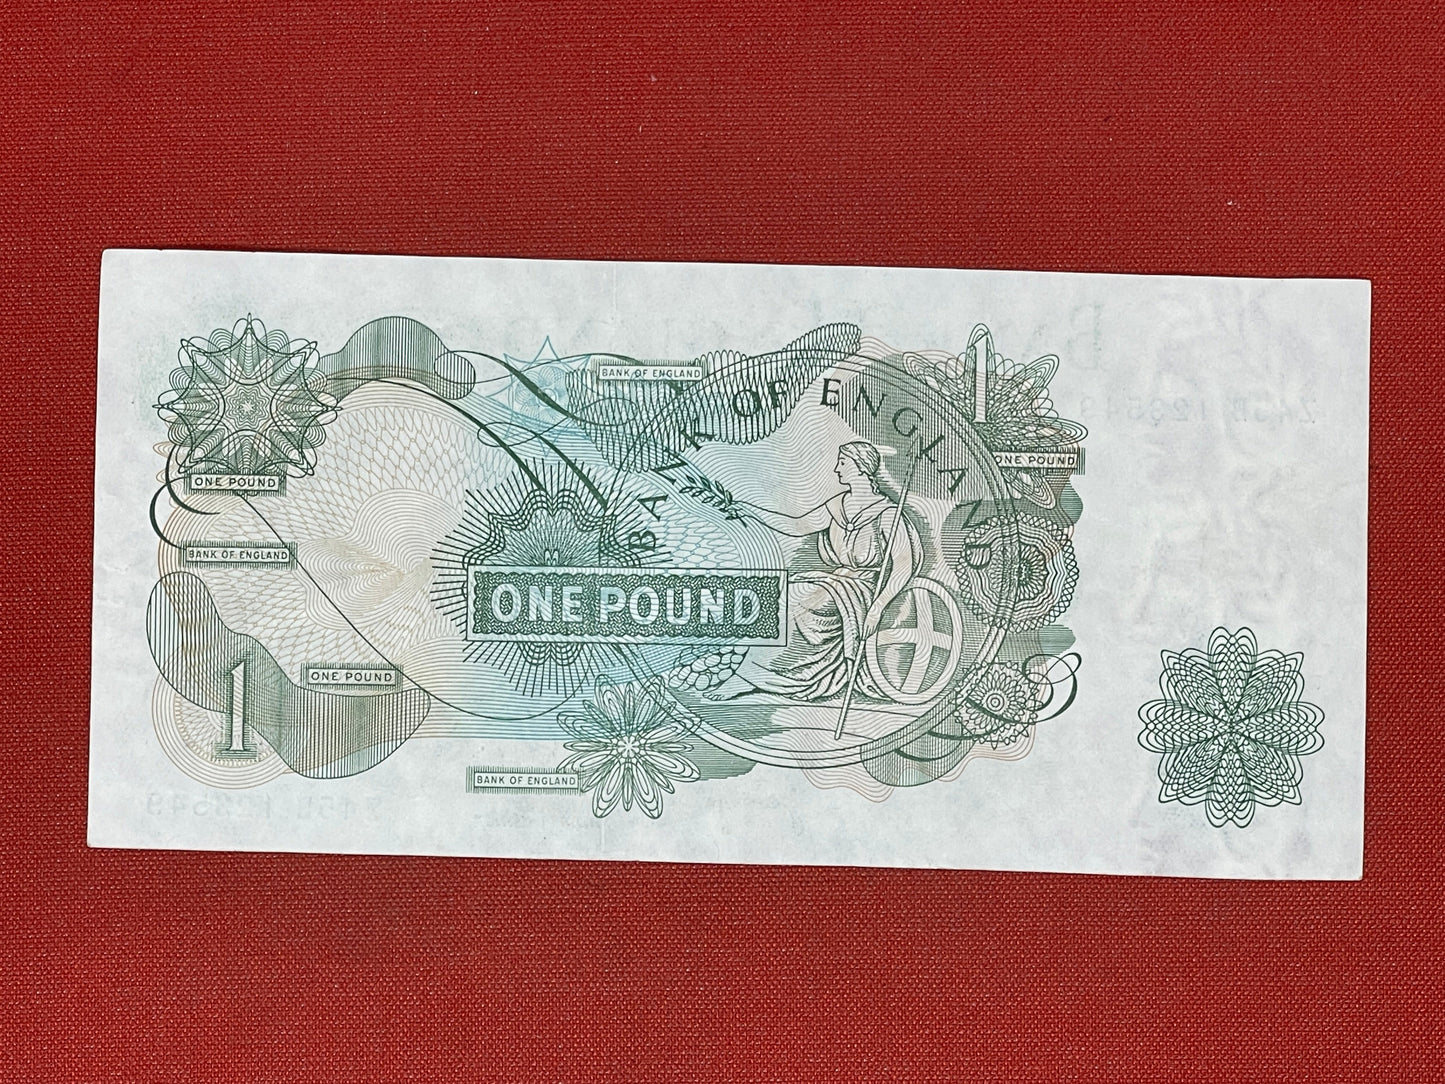 Bank of England £1 Banknote Signed J Page 1970 - 1980 ( Dugg 322 )